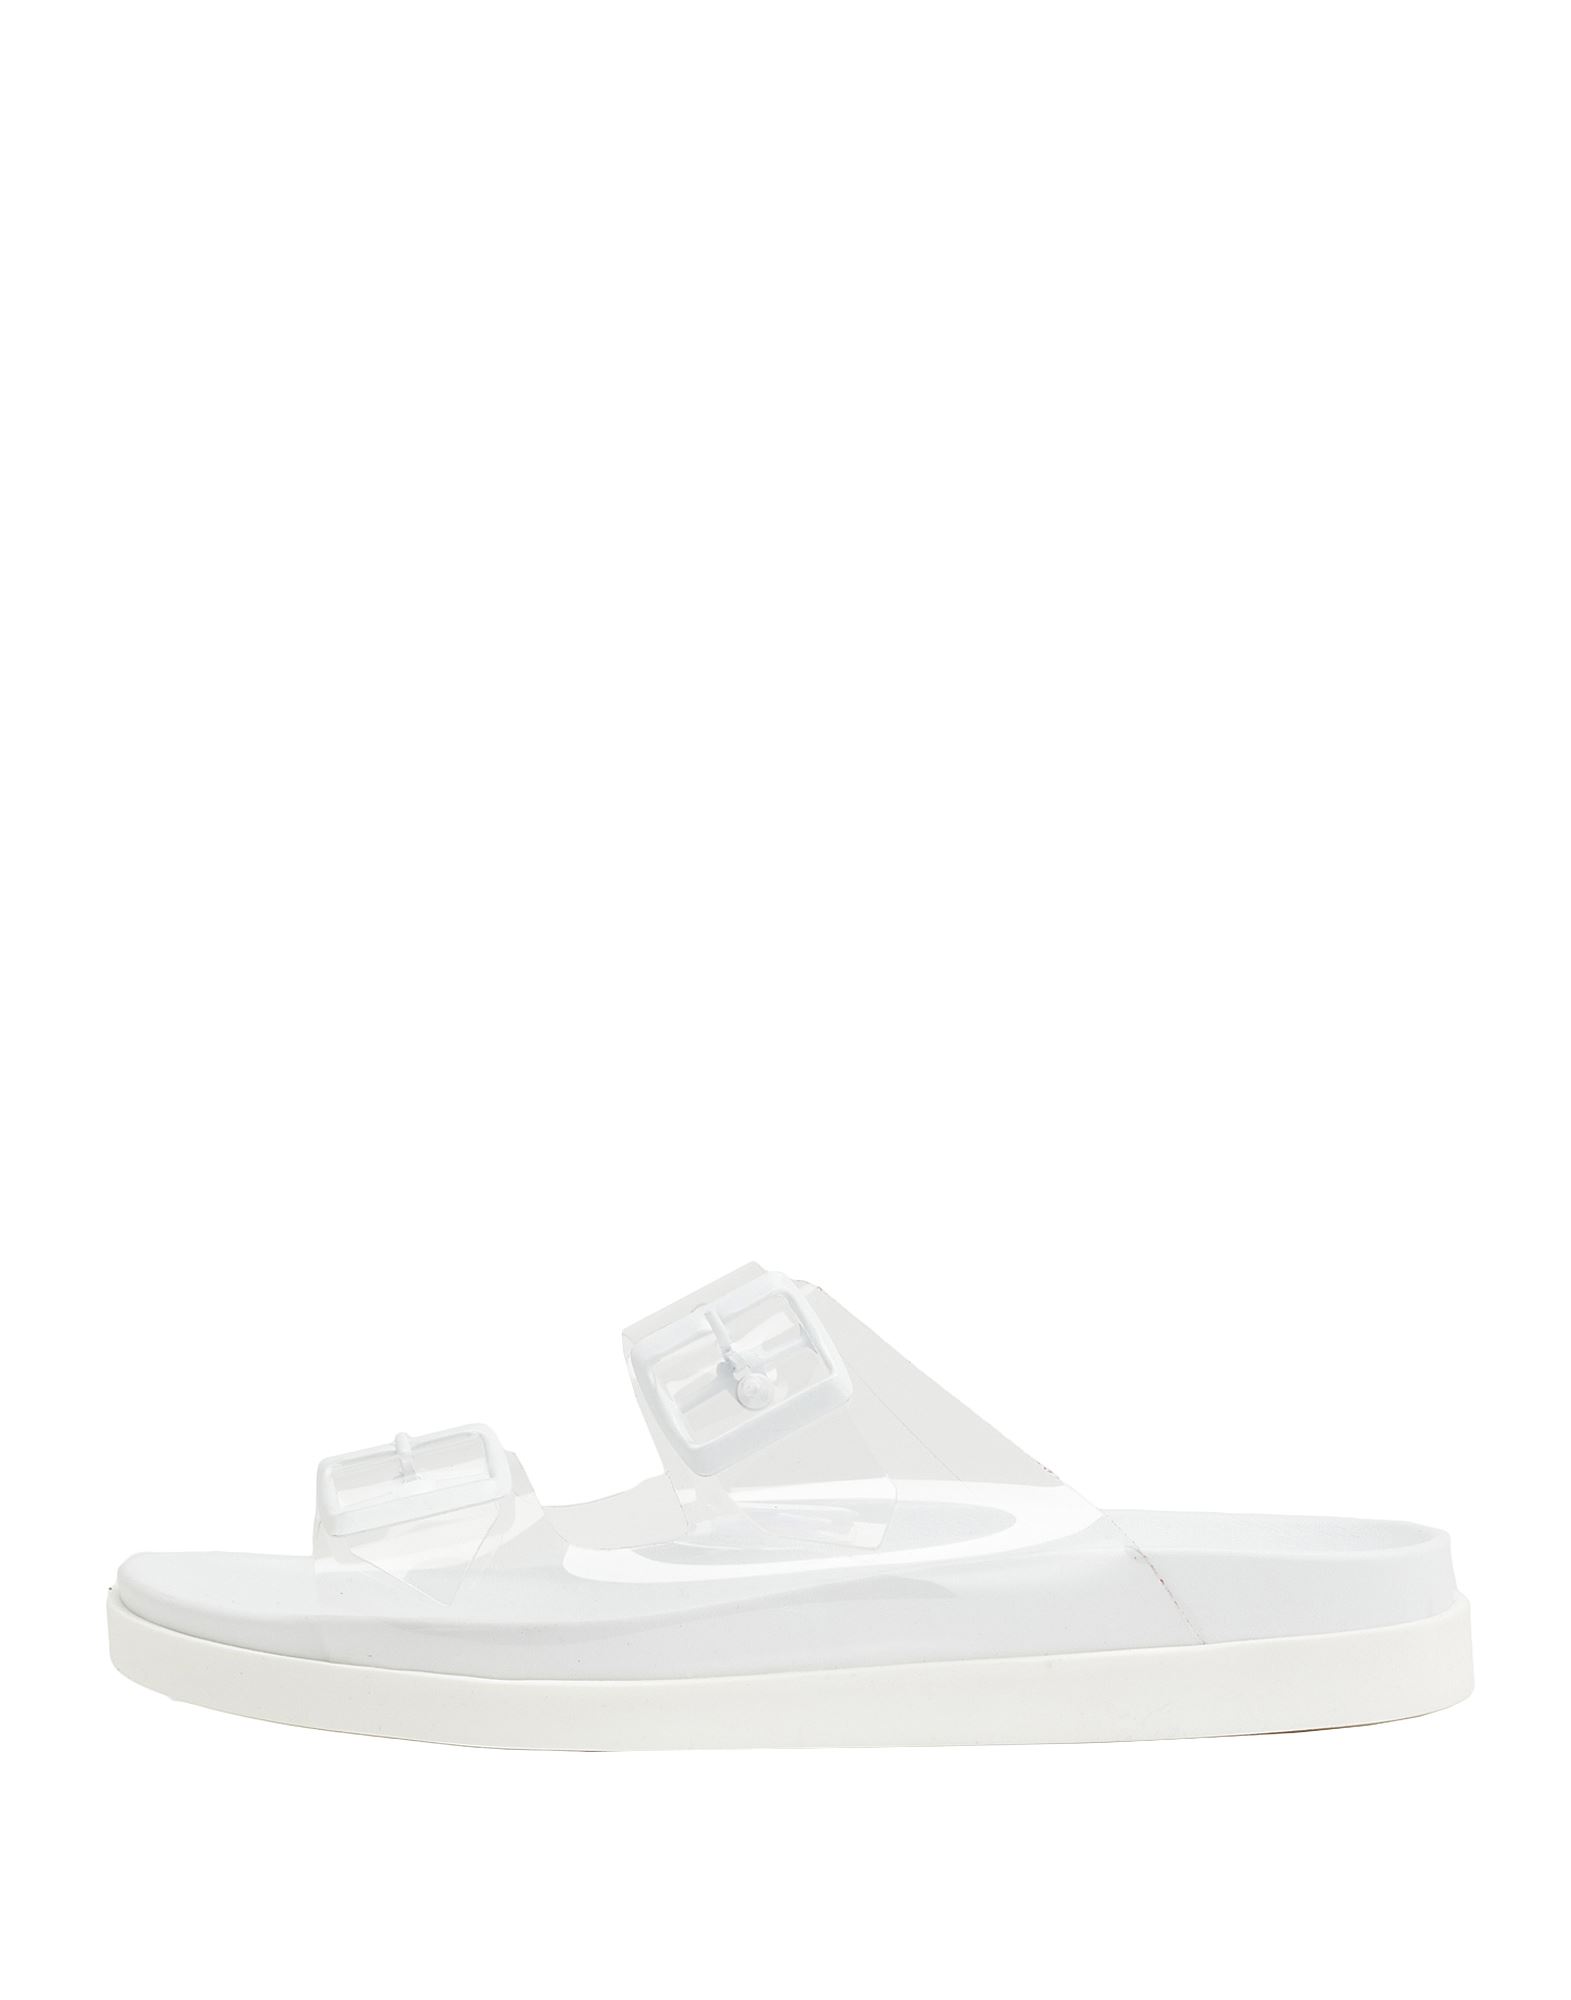 8 By Yoox Sandals In Transparent